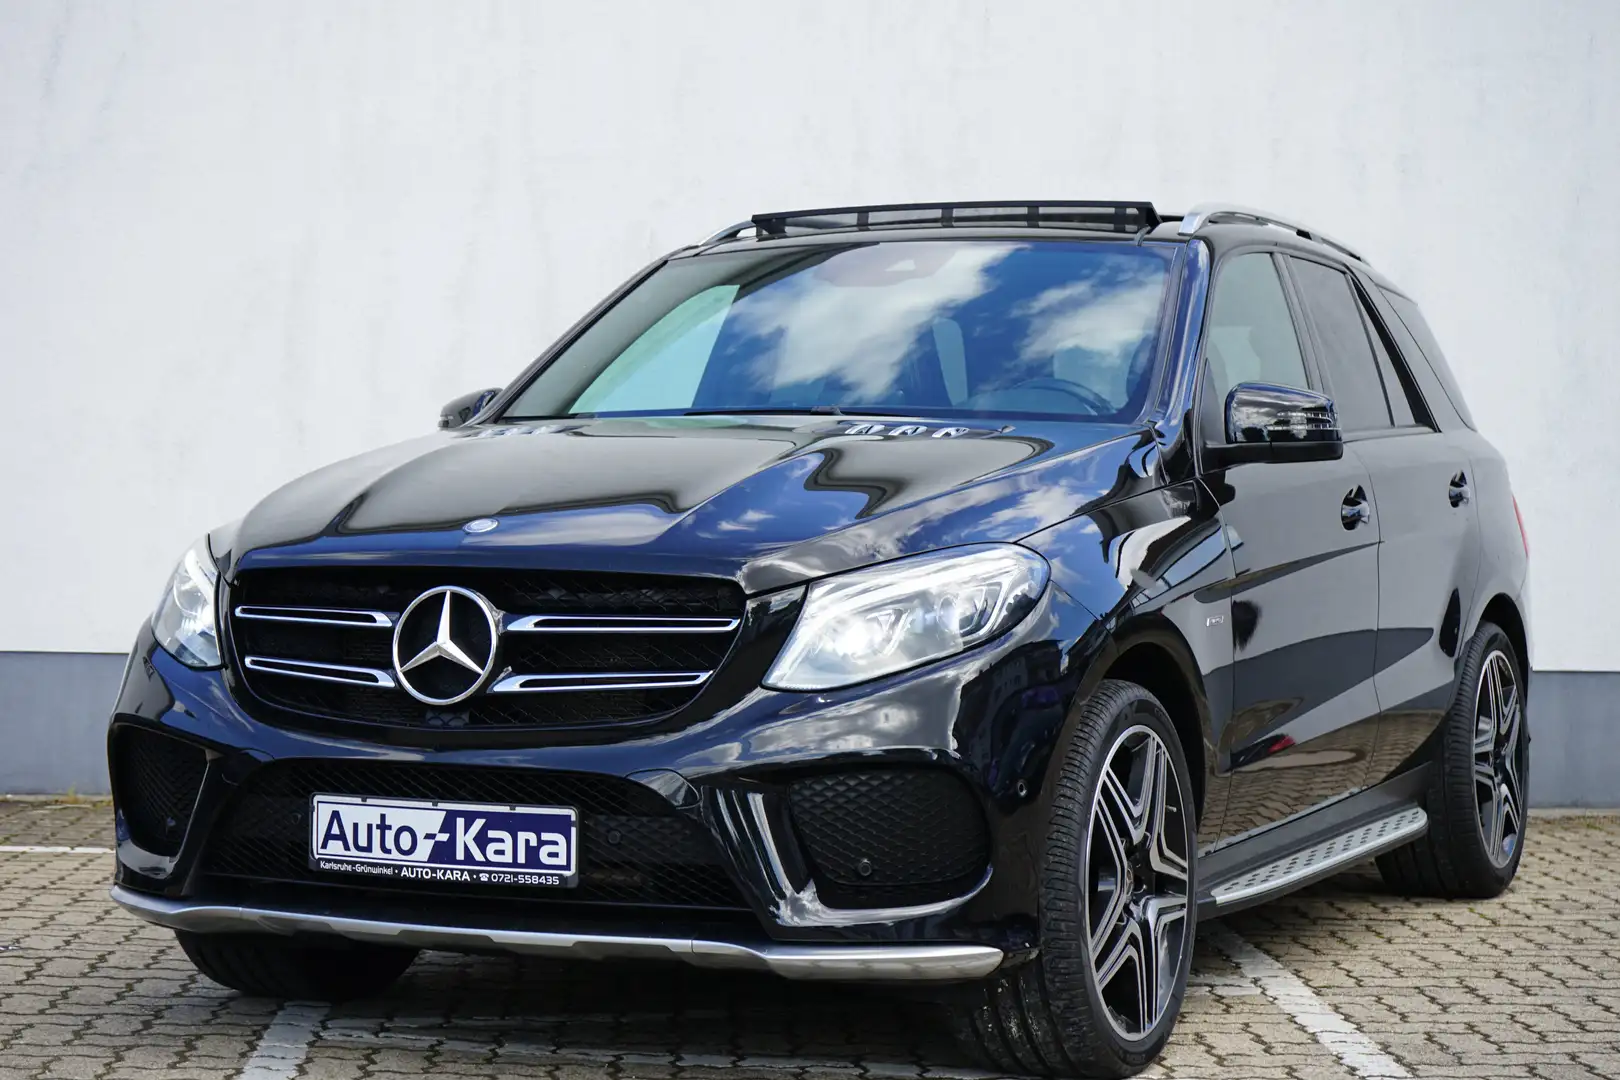 Mercedes-Benz GLE 450 4MATIC*21 Zoll*Panorama*LED ILS*Standheizung*Voll Zwart - 1